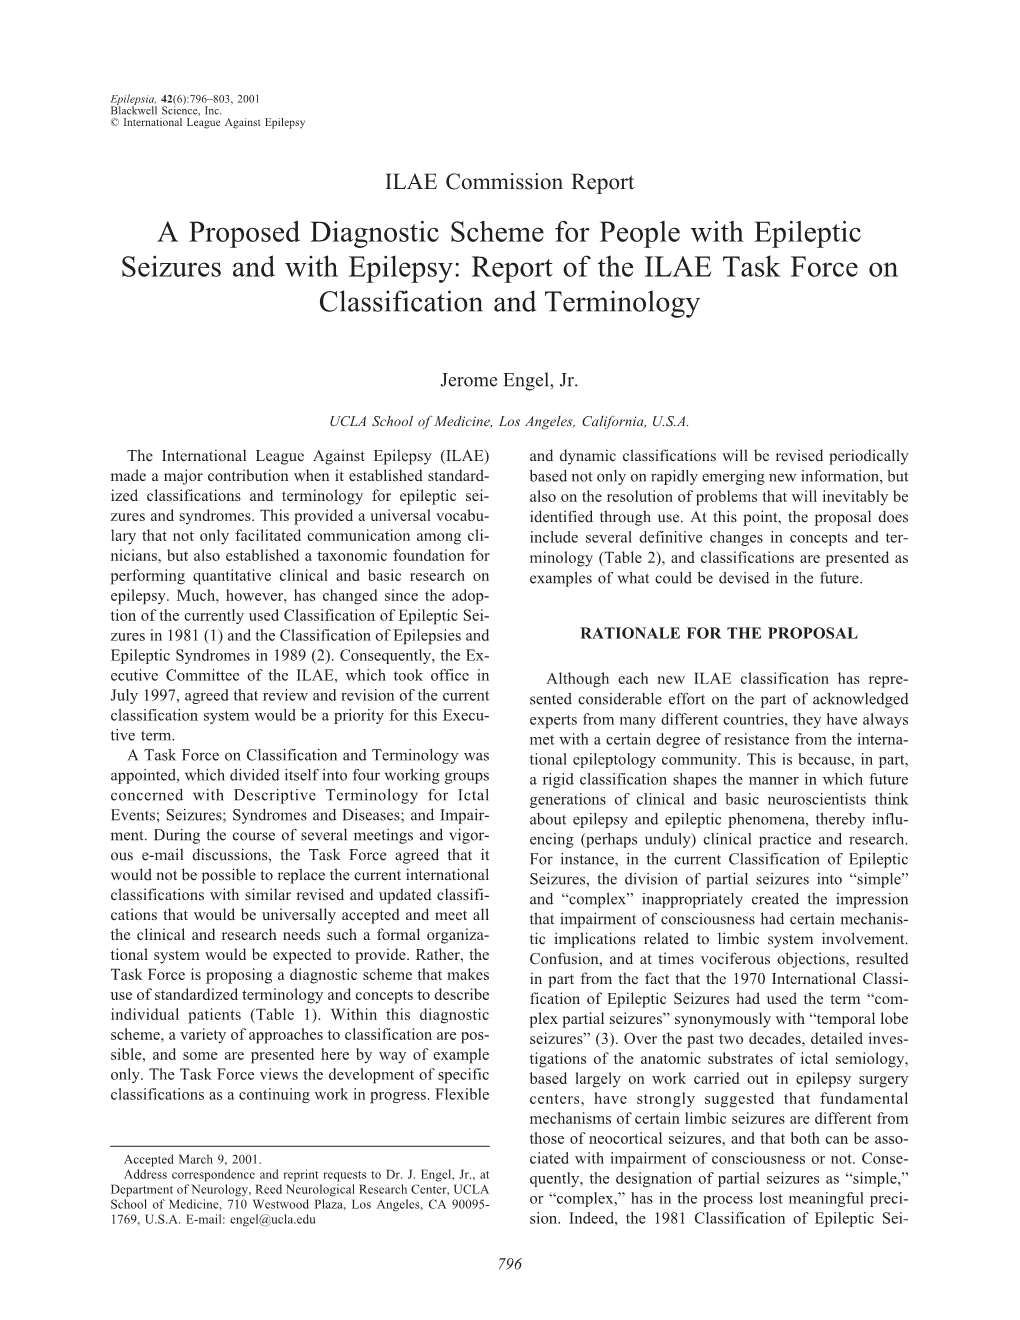 A Proposed Diagnostic Scheme for People with Epileptic Seizures and with Epilepsy: Report of the ILAE Task Force on Classification and Terminology